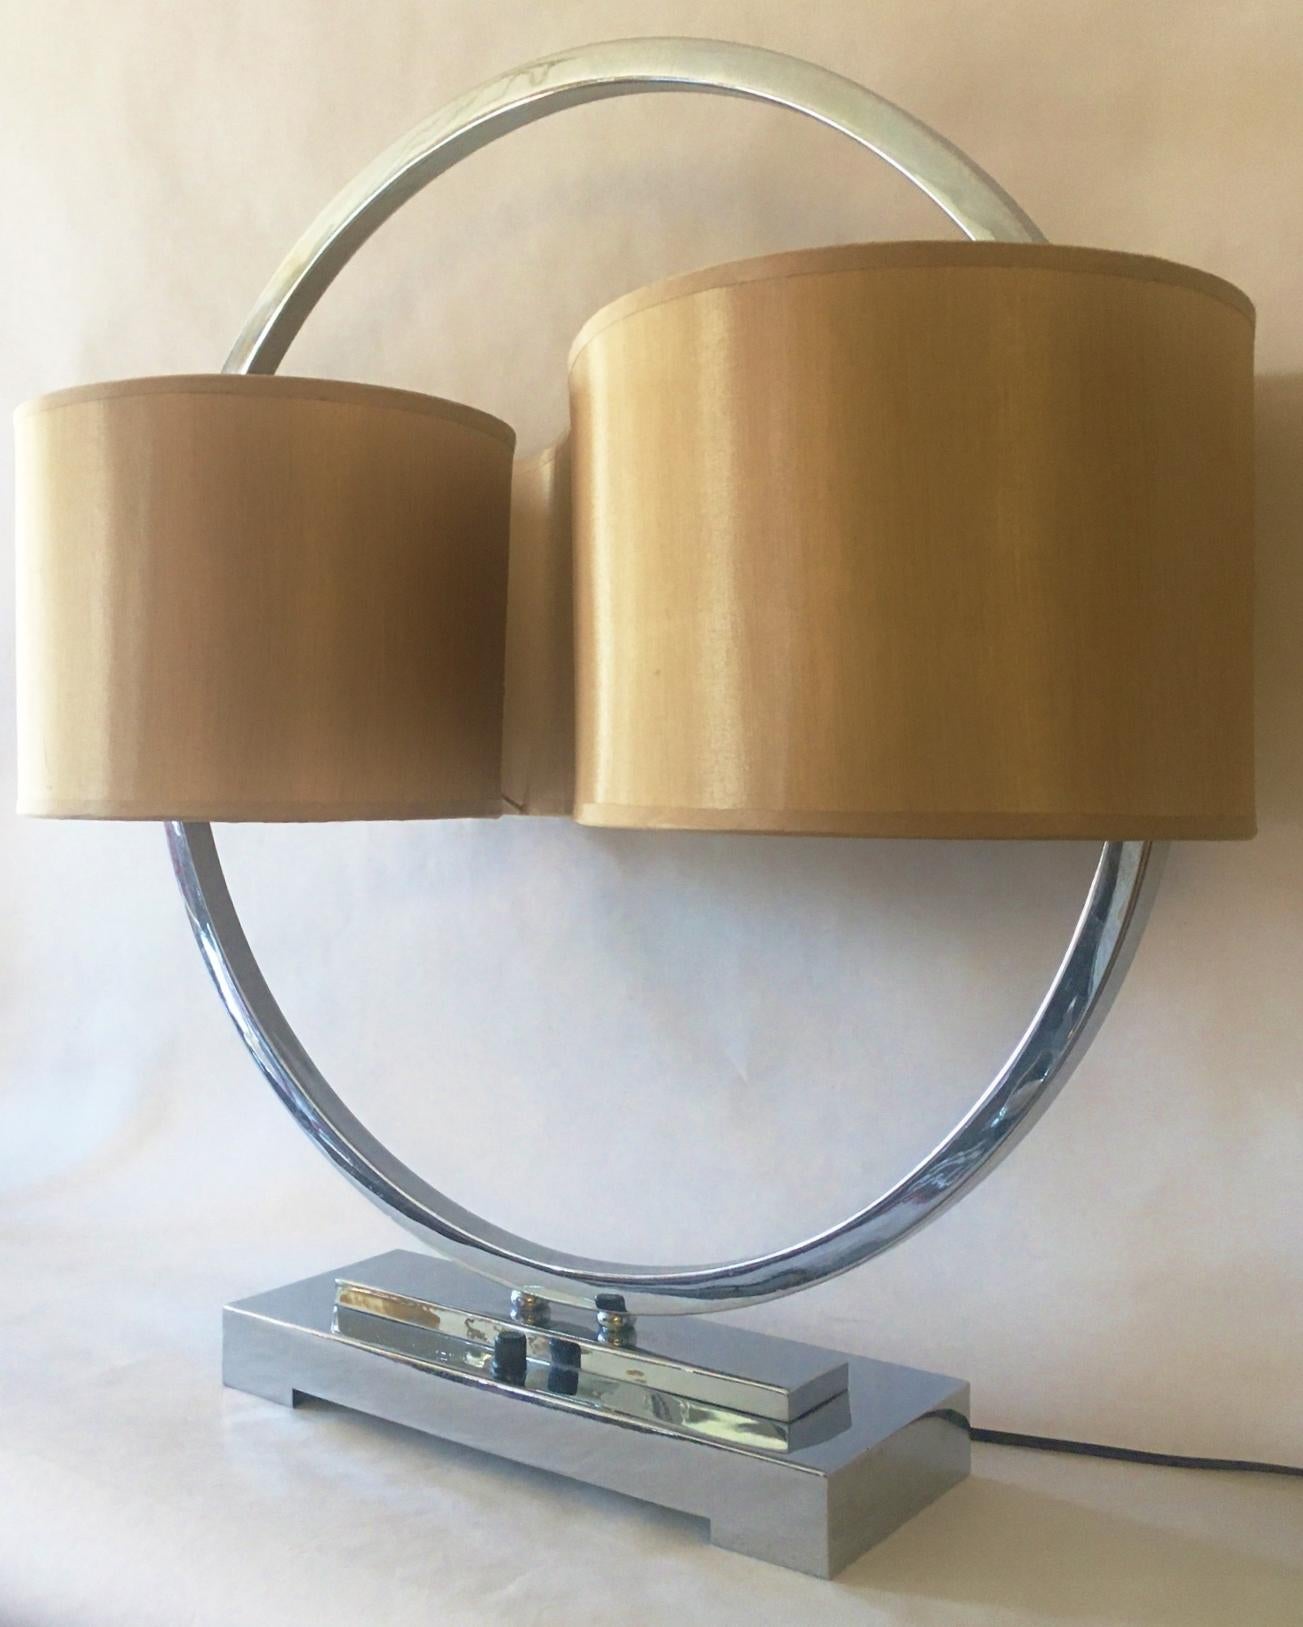 Large American Art Deco Revival Chrome Twin Console Lamp with Ribbon Shade In Excellent Condition For Sale In Port Hope, ON